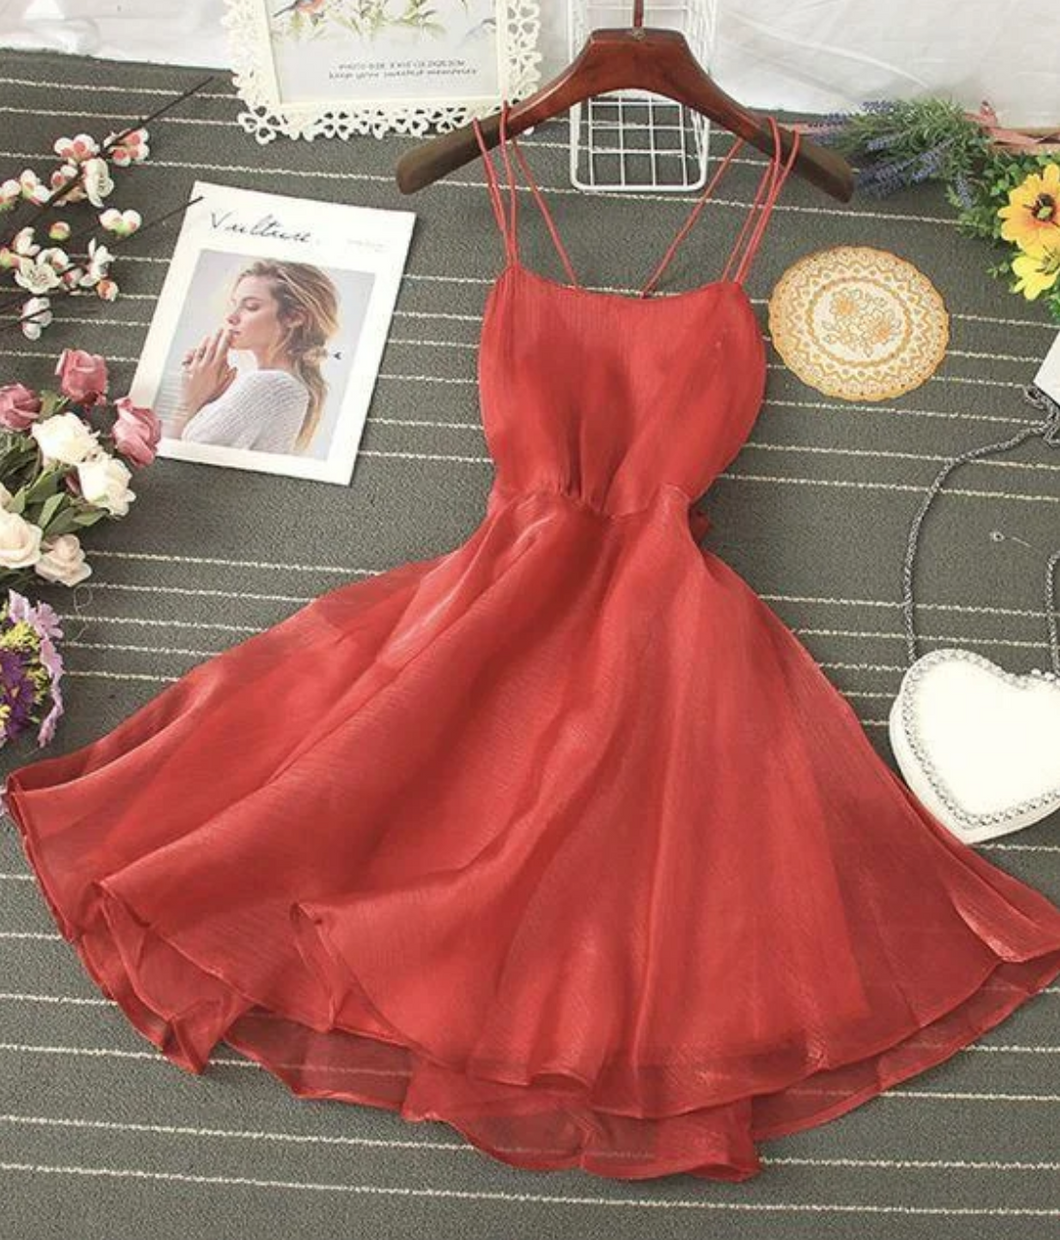 Cute Tulle Sophie Backless Short Homecoming Dresses Dress Mini homecoming Dress CD11565